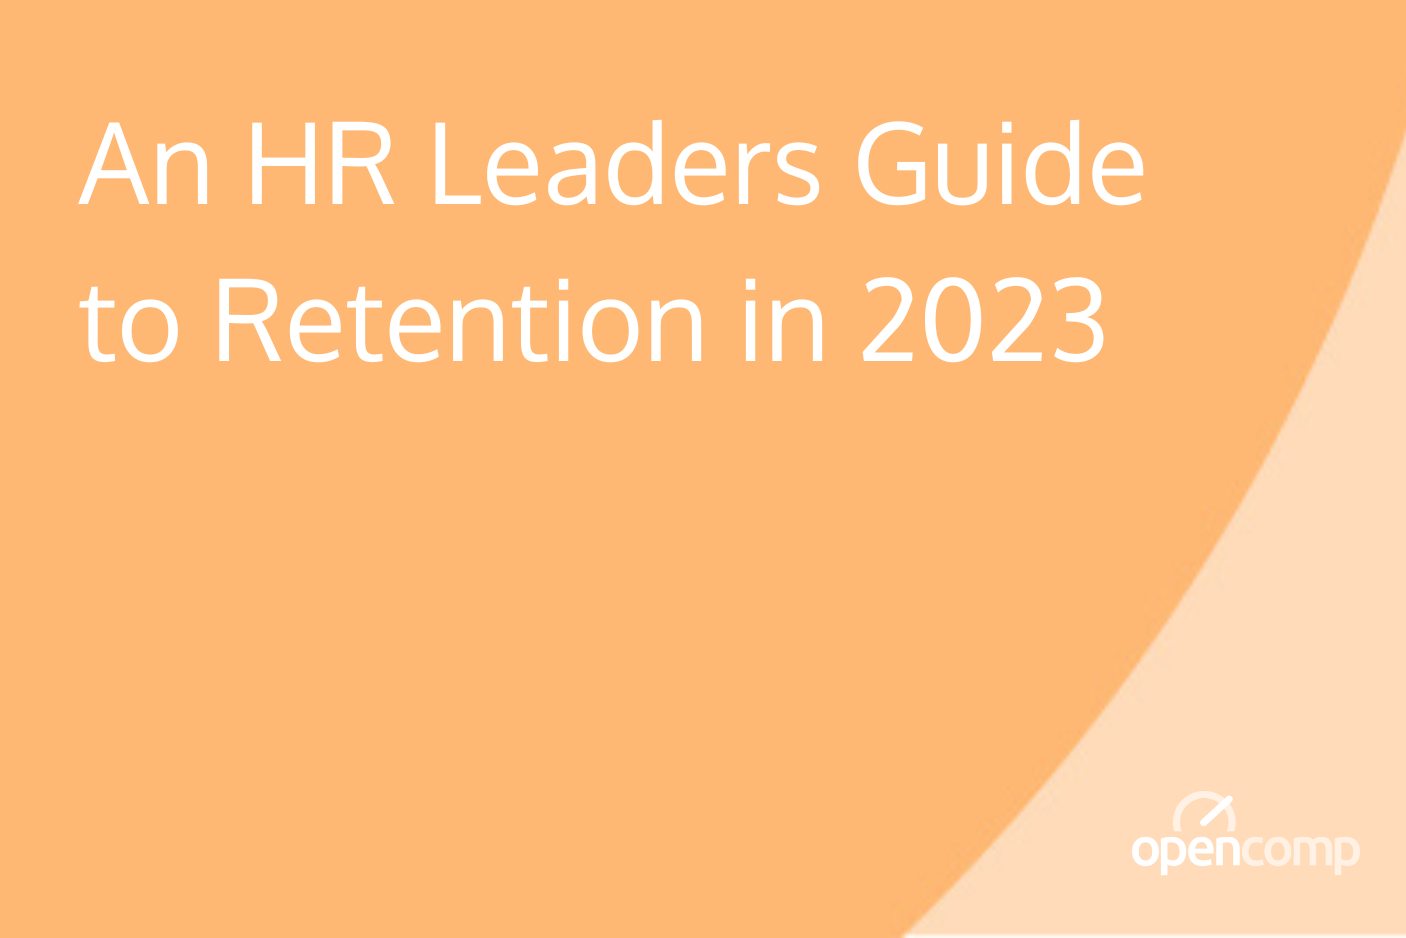 An HR Leaders Guide to Retention in 2023